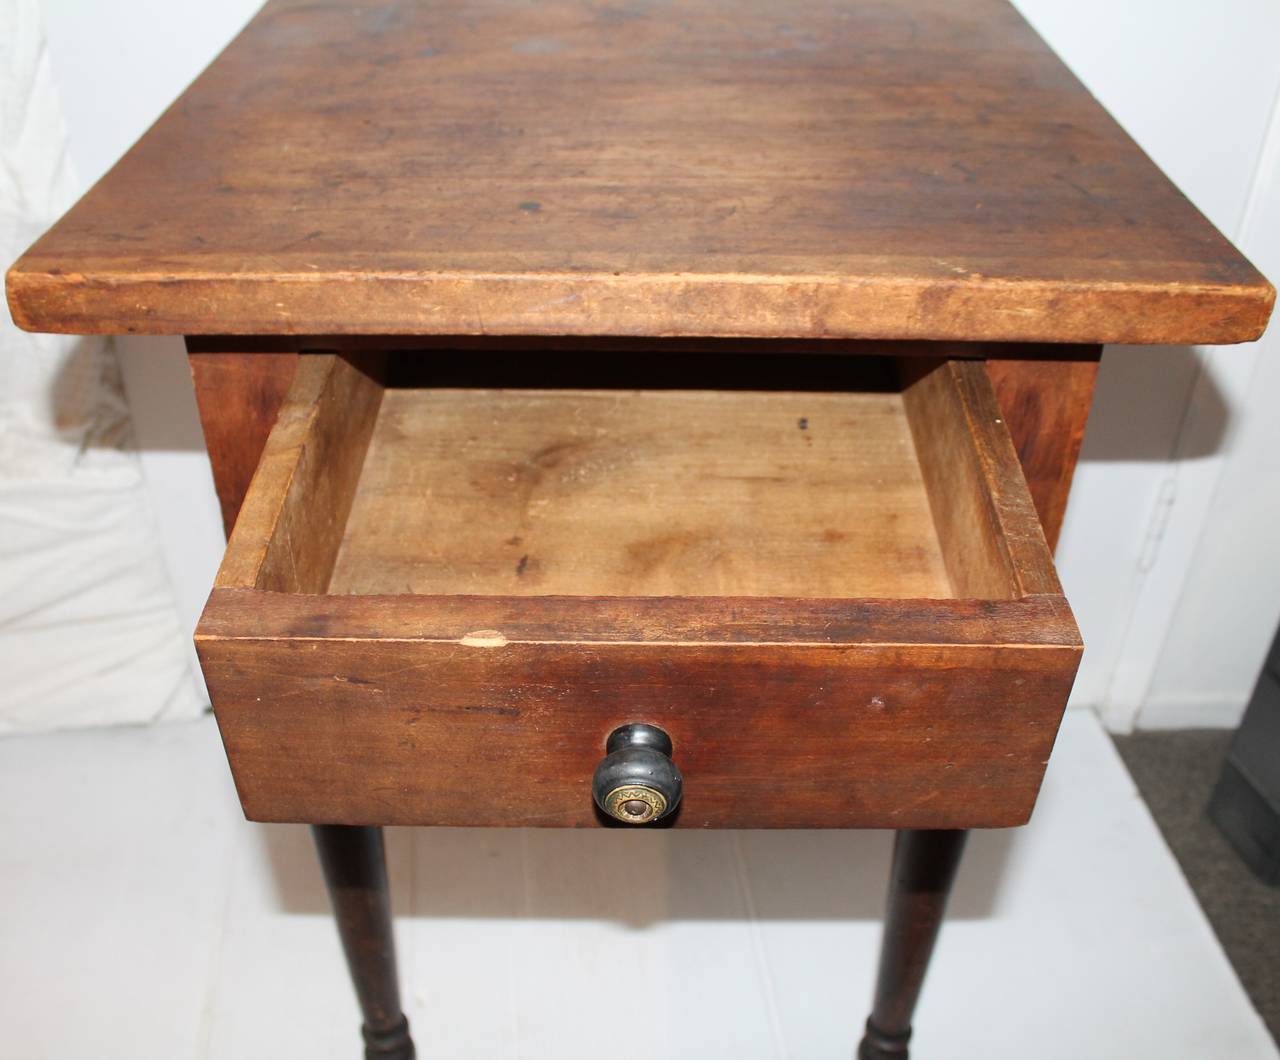 This very early one-drawer nightstand was found in the mid-west in a cabin. The original dry surface tells us its been in a very dry and hot climate with amazing untouched worn surface. The base of the legs retains a original black painted, grungy